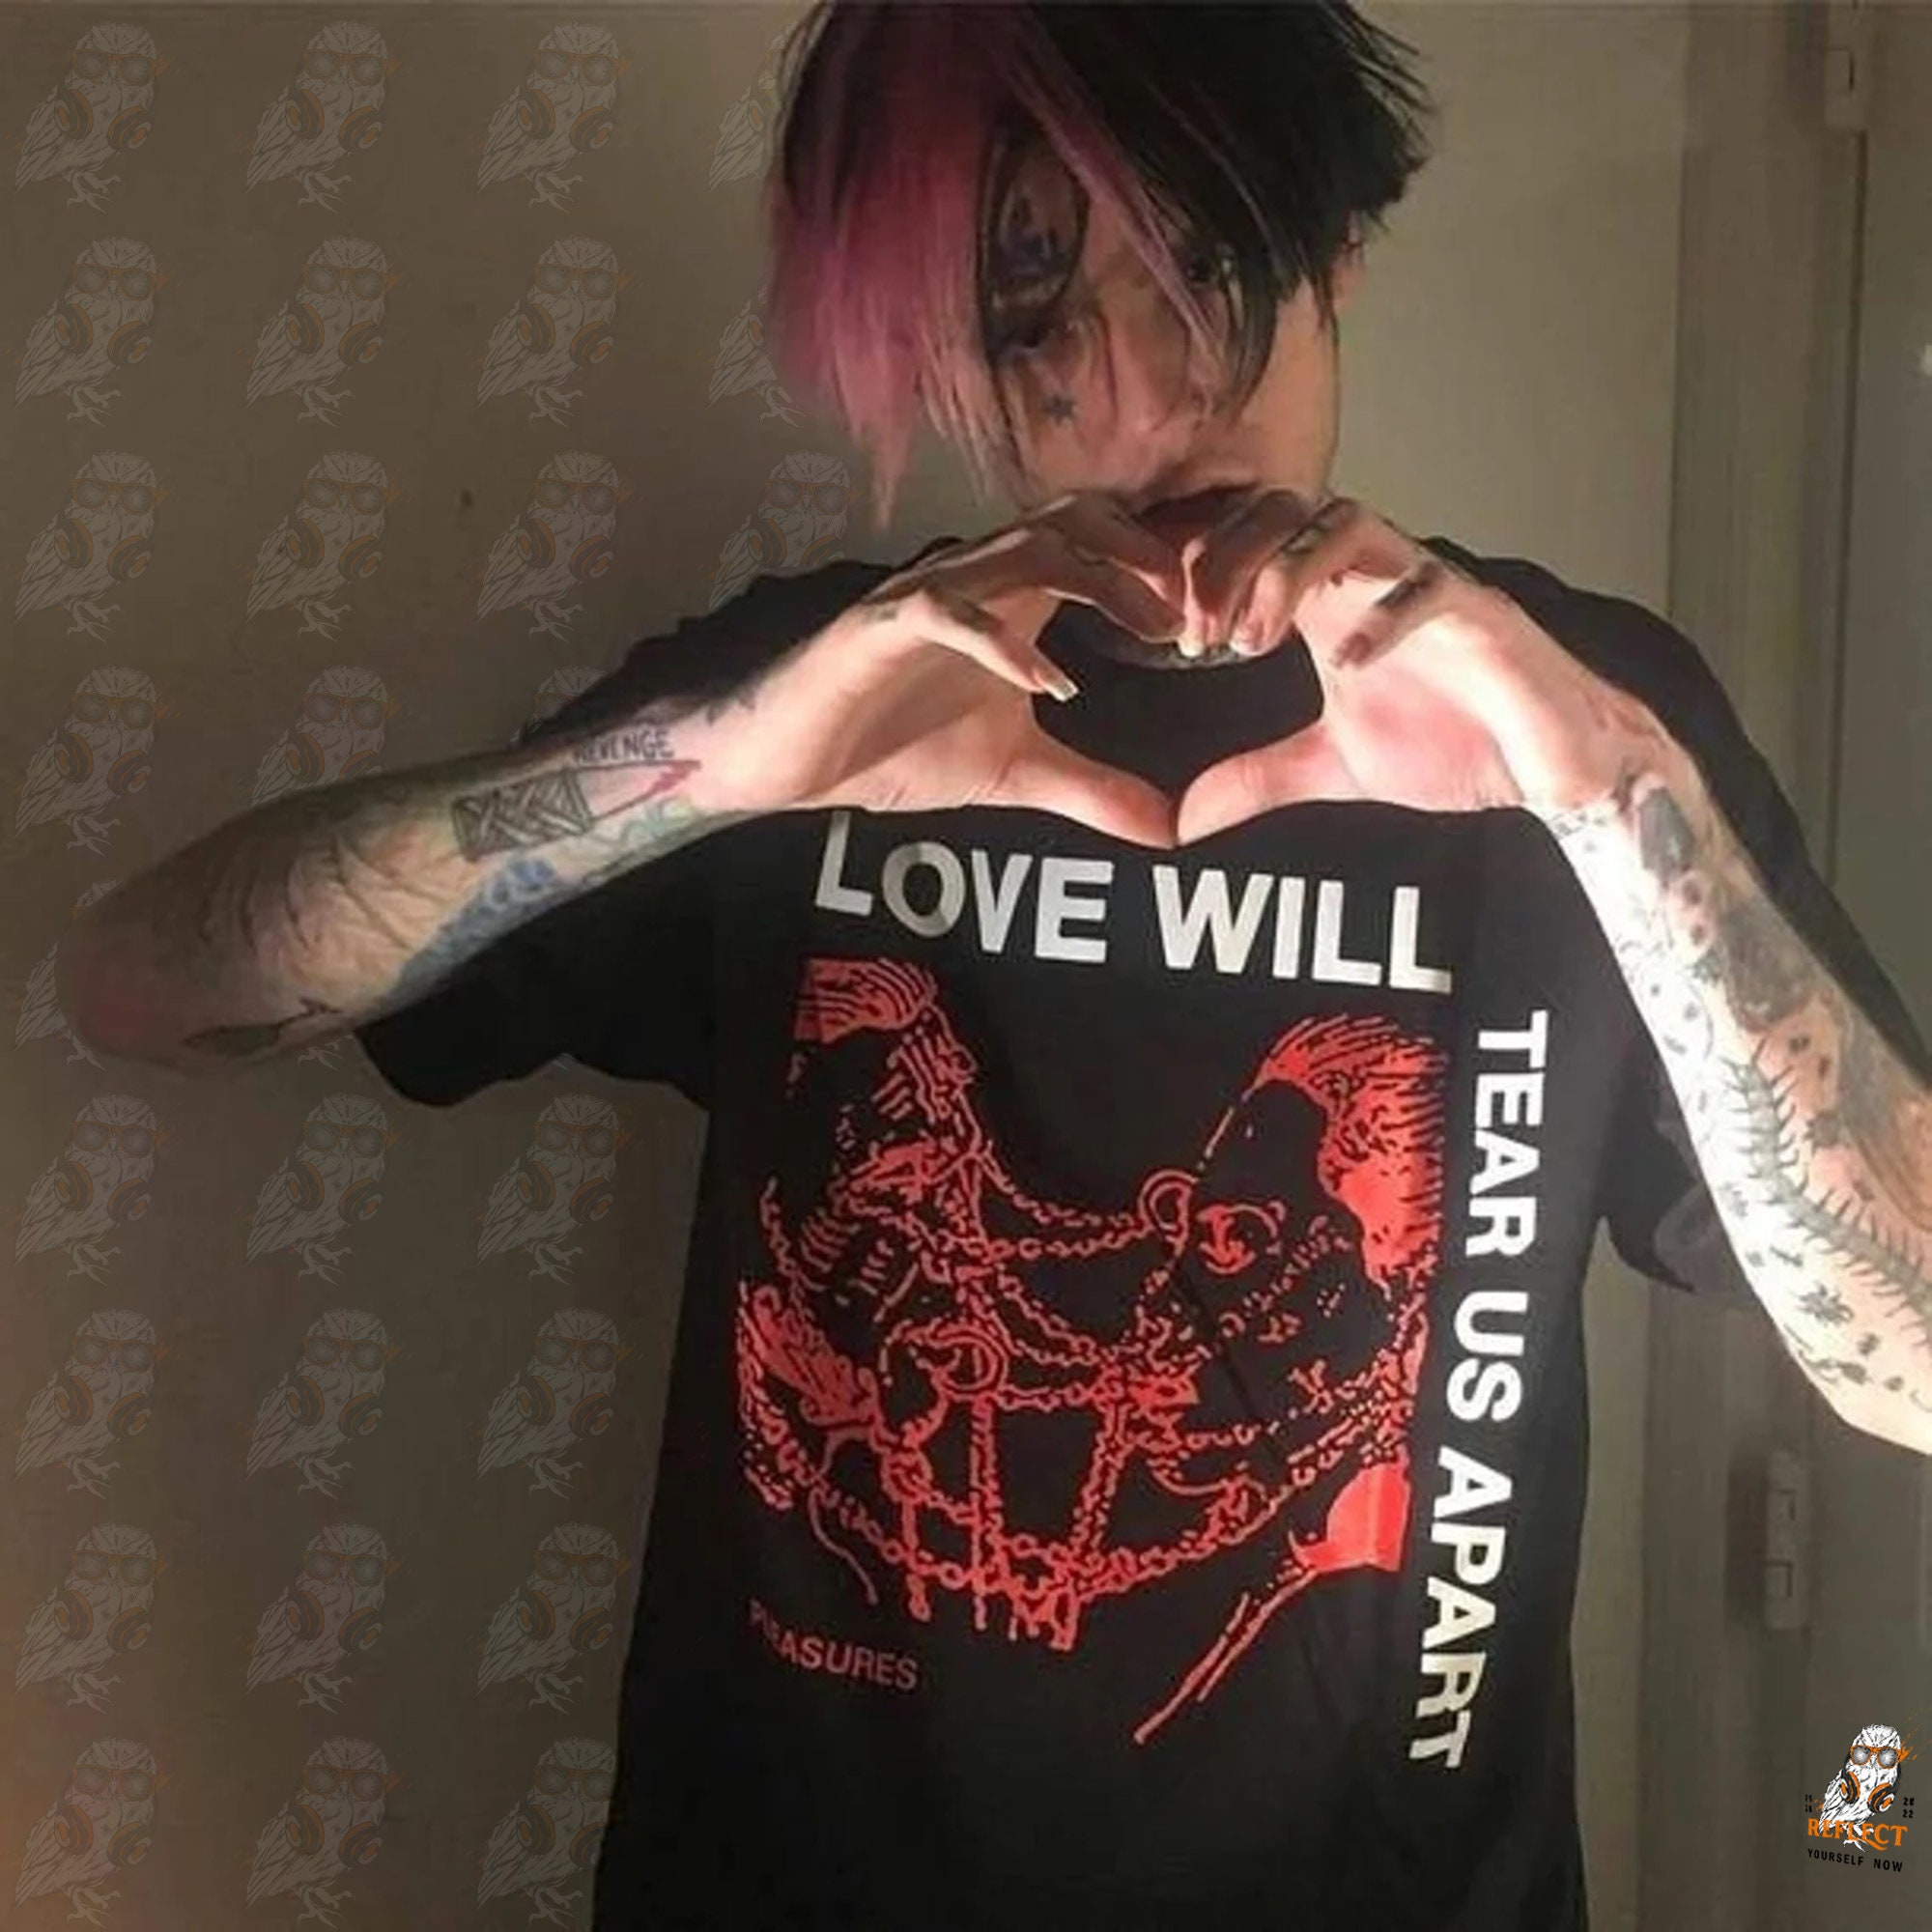 Discover Lil Peep, Love Will Tear Us Apart Shirt, Aesthetic Shirt, Aesthetic Clothing, Lil Peep Shirt